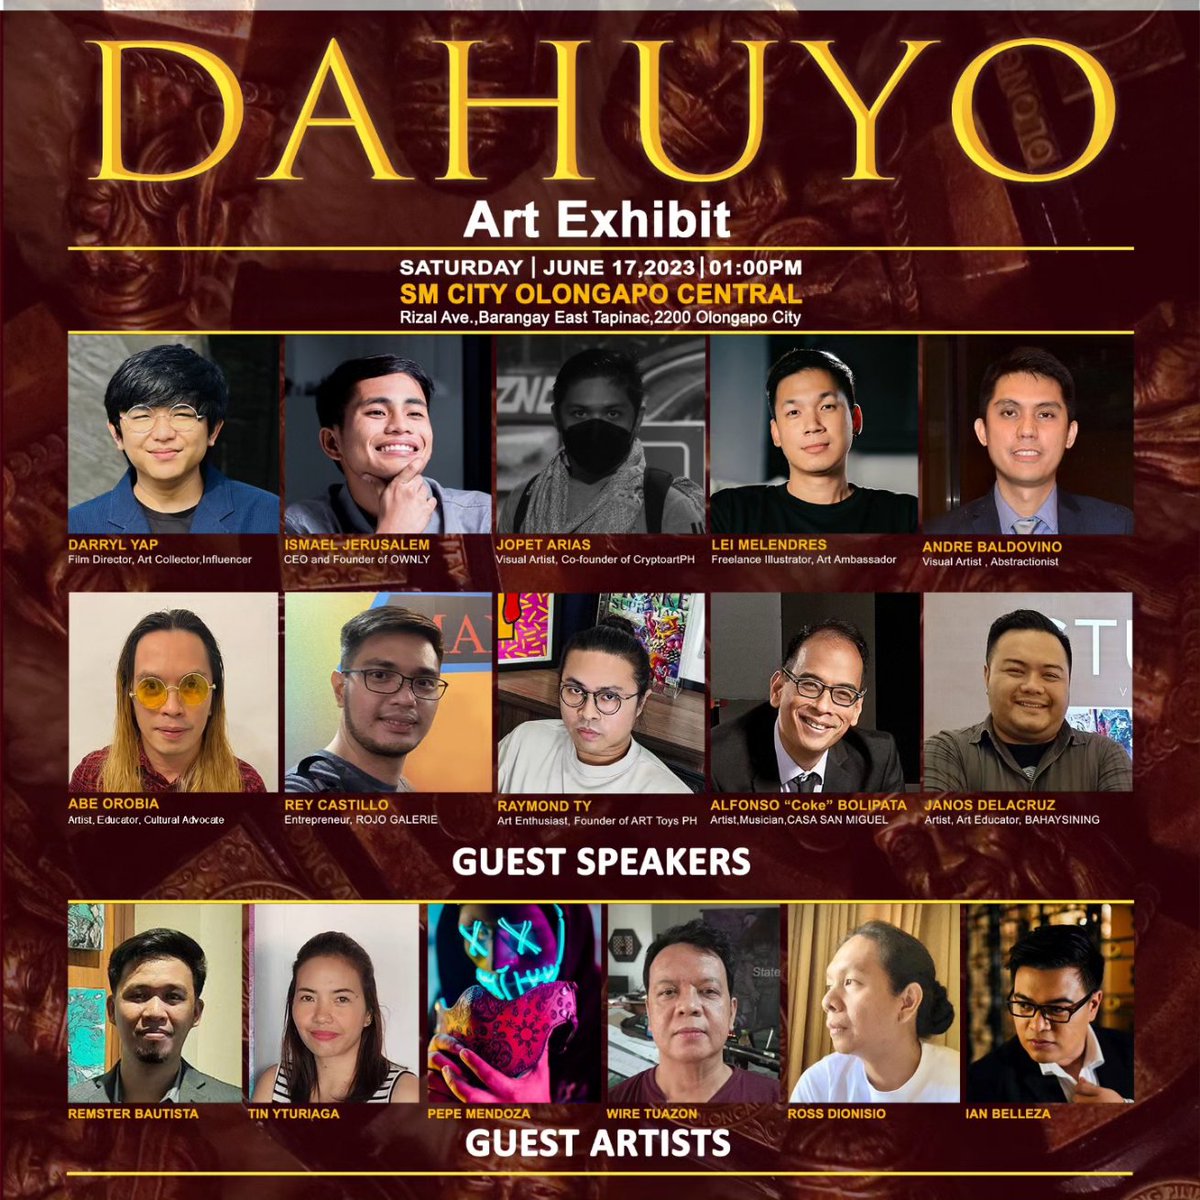 'Pink carrothorn and Extraterrestrial frens' at 'Dahuyo' Art Exhibit, June 17, 2023, SM Olongapo Central, East Tapinac, Olongapo City.

#carrothorn #oilpainting #oiloncanvas
#lowbrowart #ufo #extraterrestrials
#popsurrealism #exhibition
#vegetarian #carrot #owlpainting